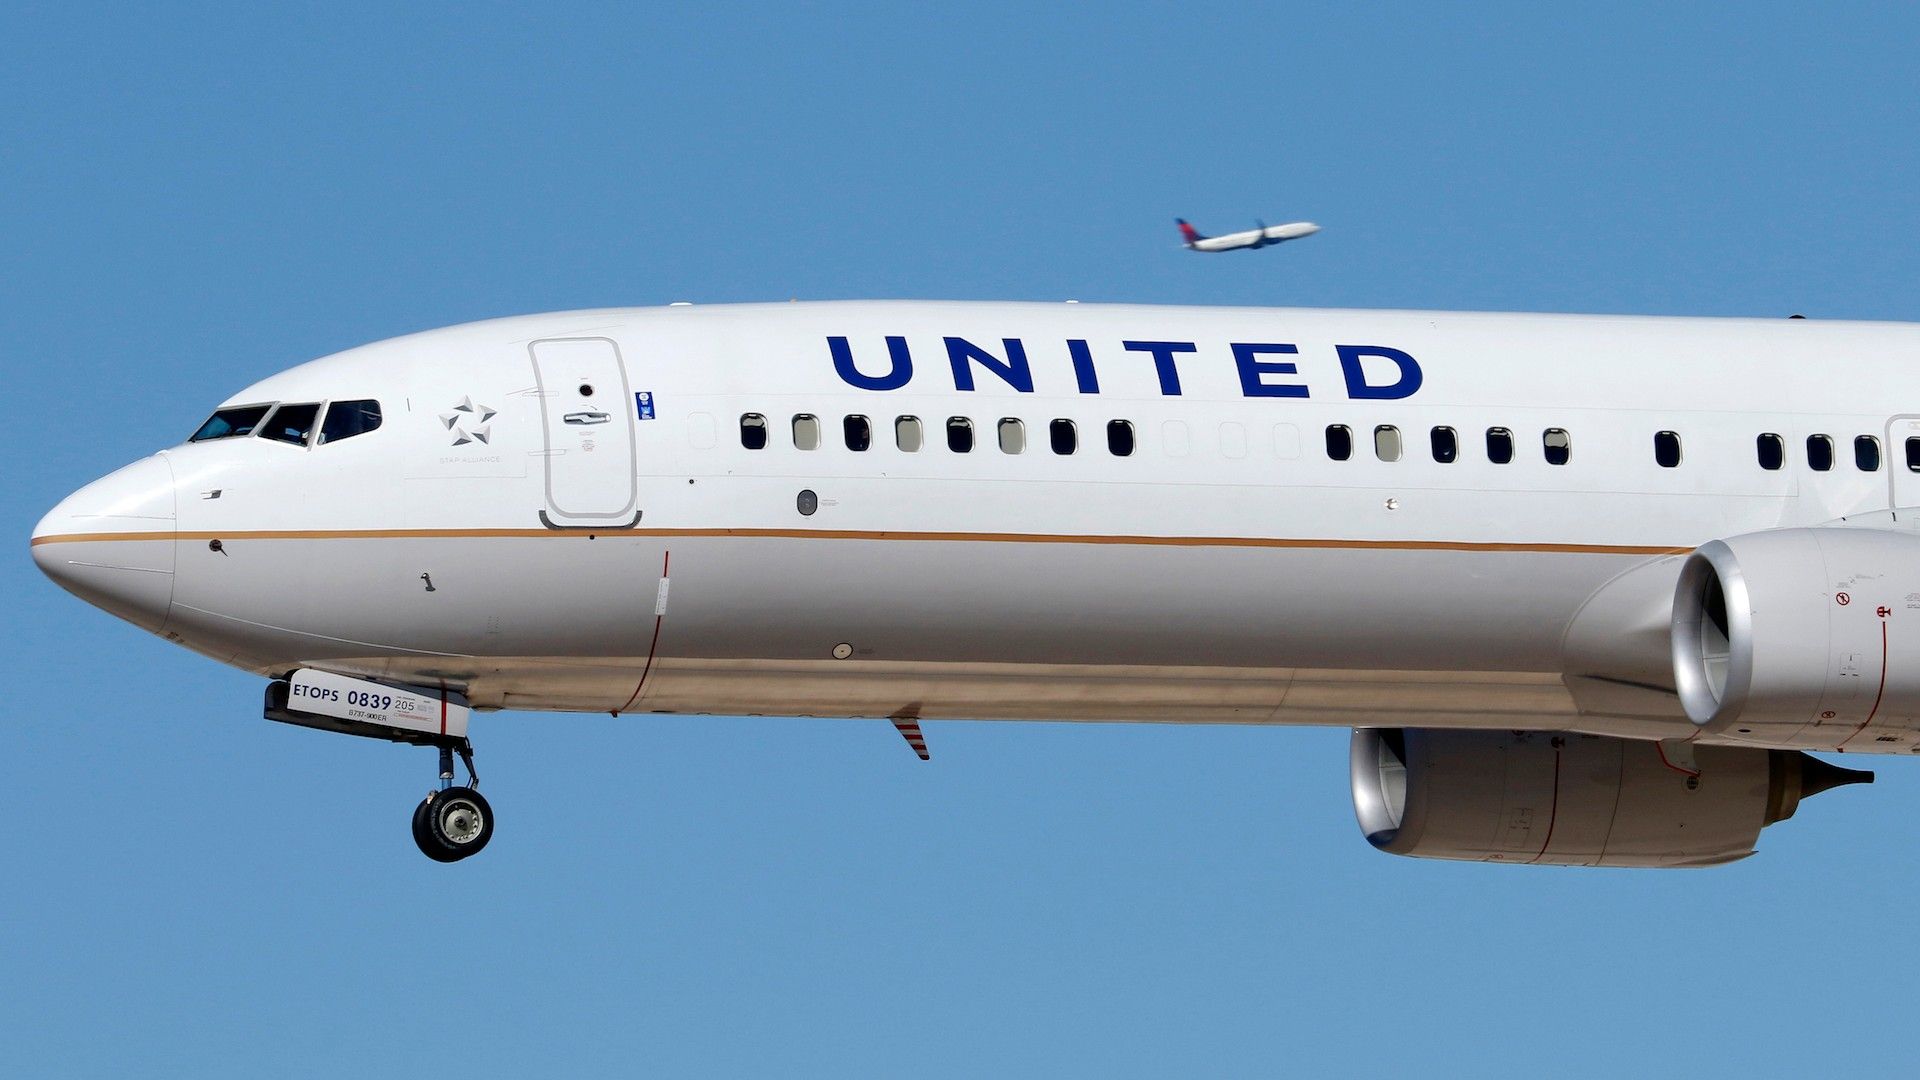 United Airlines says employees followed policy in removing man